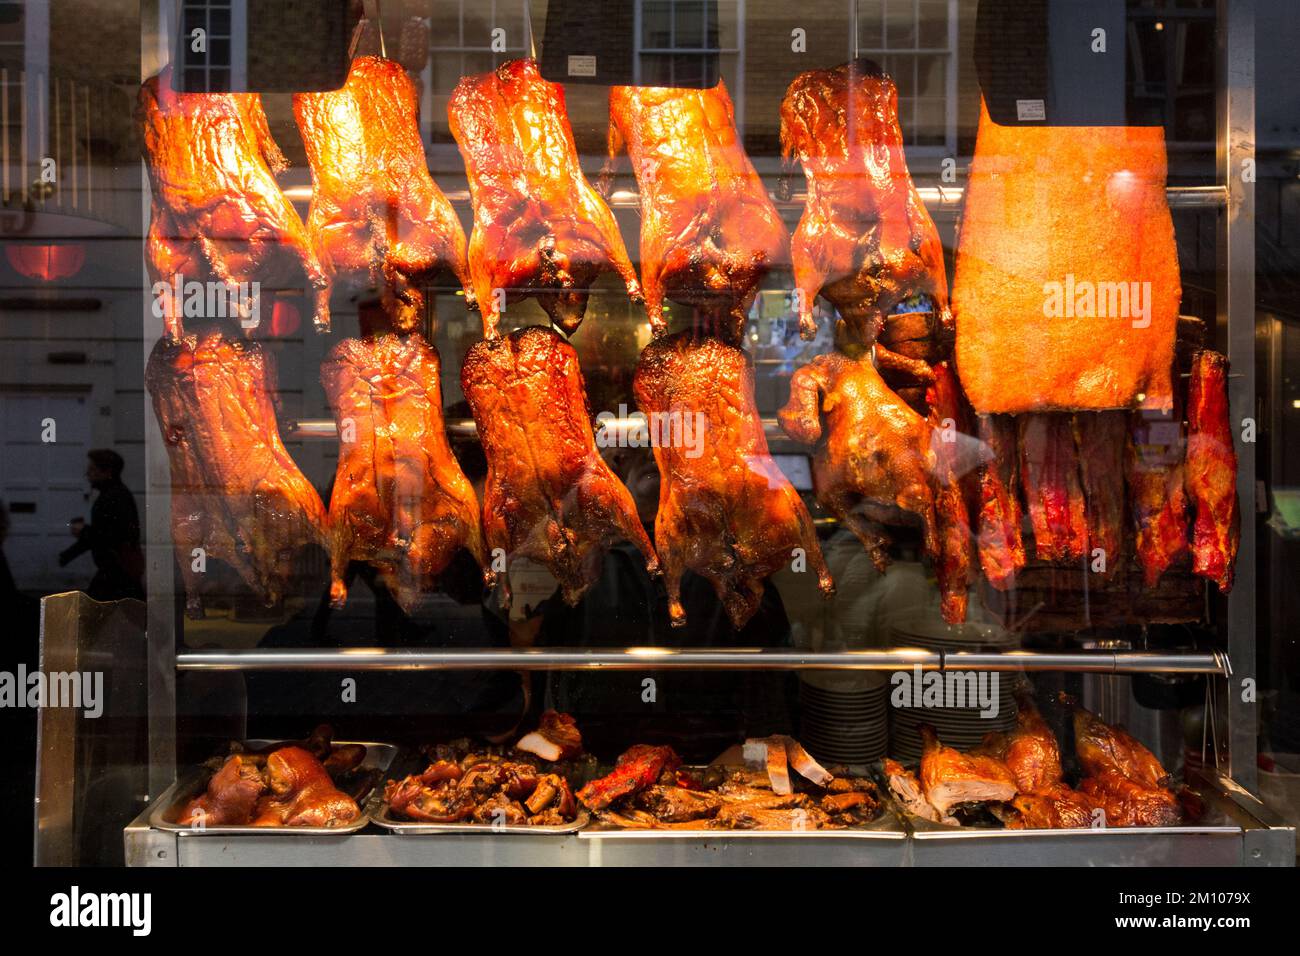 Aromatic Chinese crispy duck on display in a shop window in China Town,Soho, London, England, UK. Stock Photo